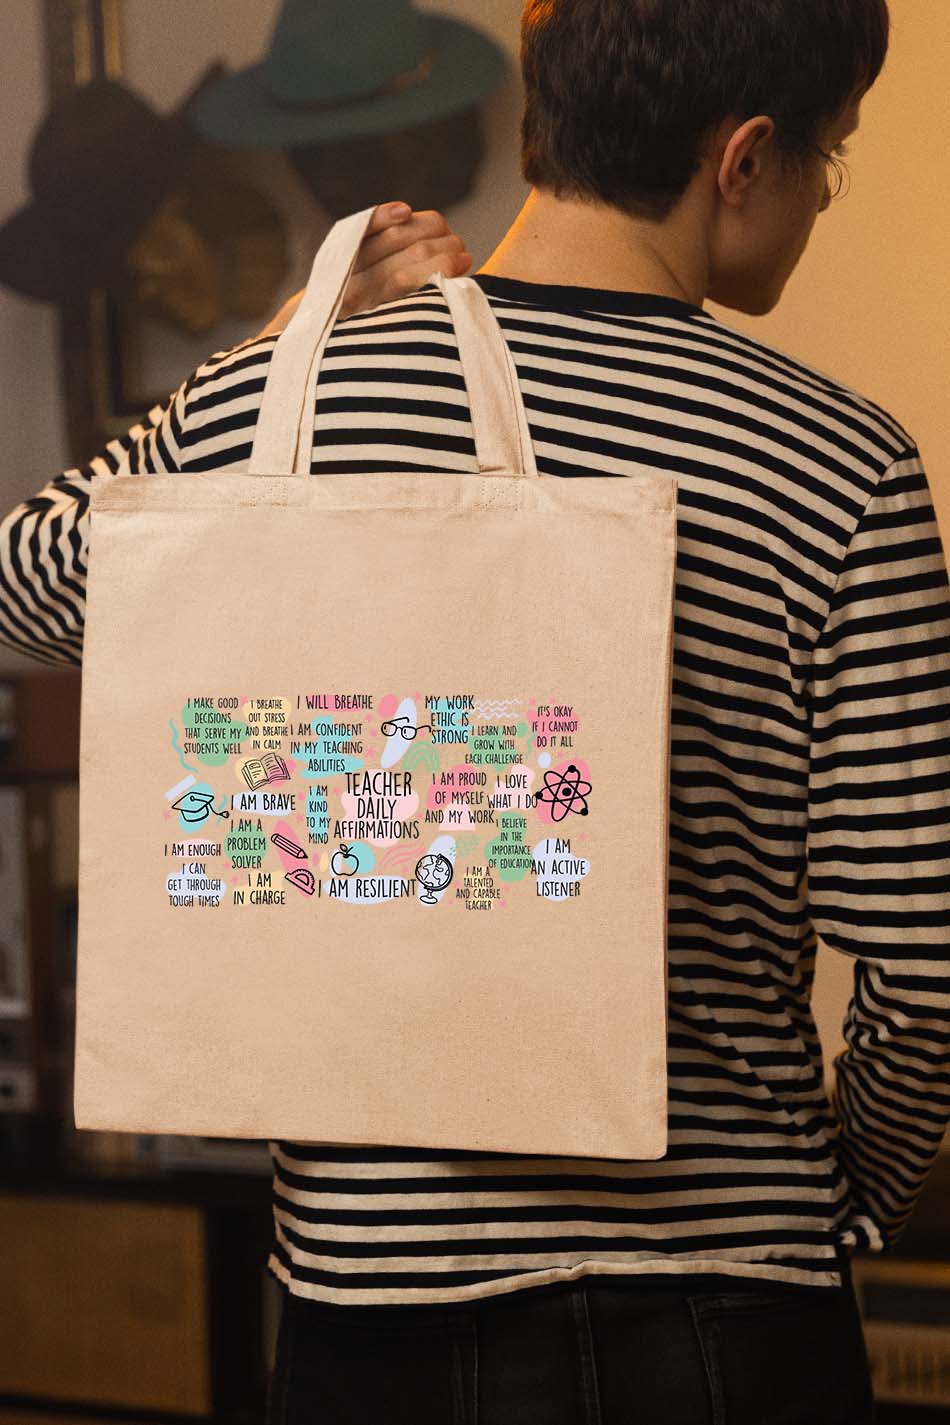 Teacher Daily Affirmations Tote Bag